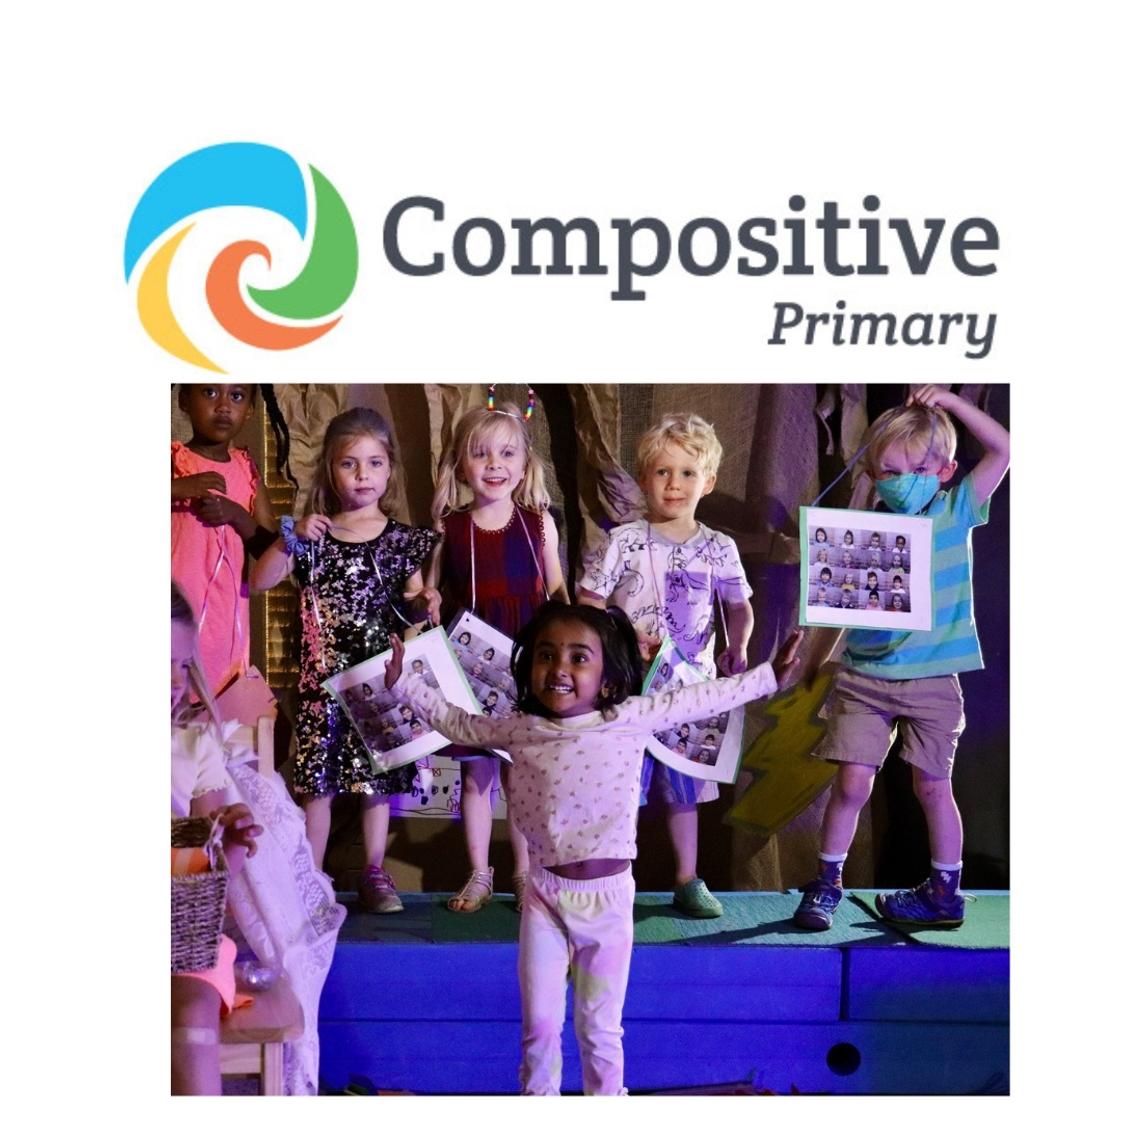 Compositive Primary, Preschool - 5th Gd Photo #1 - We lead with curiosity